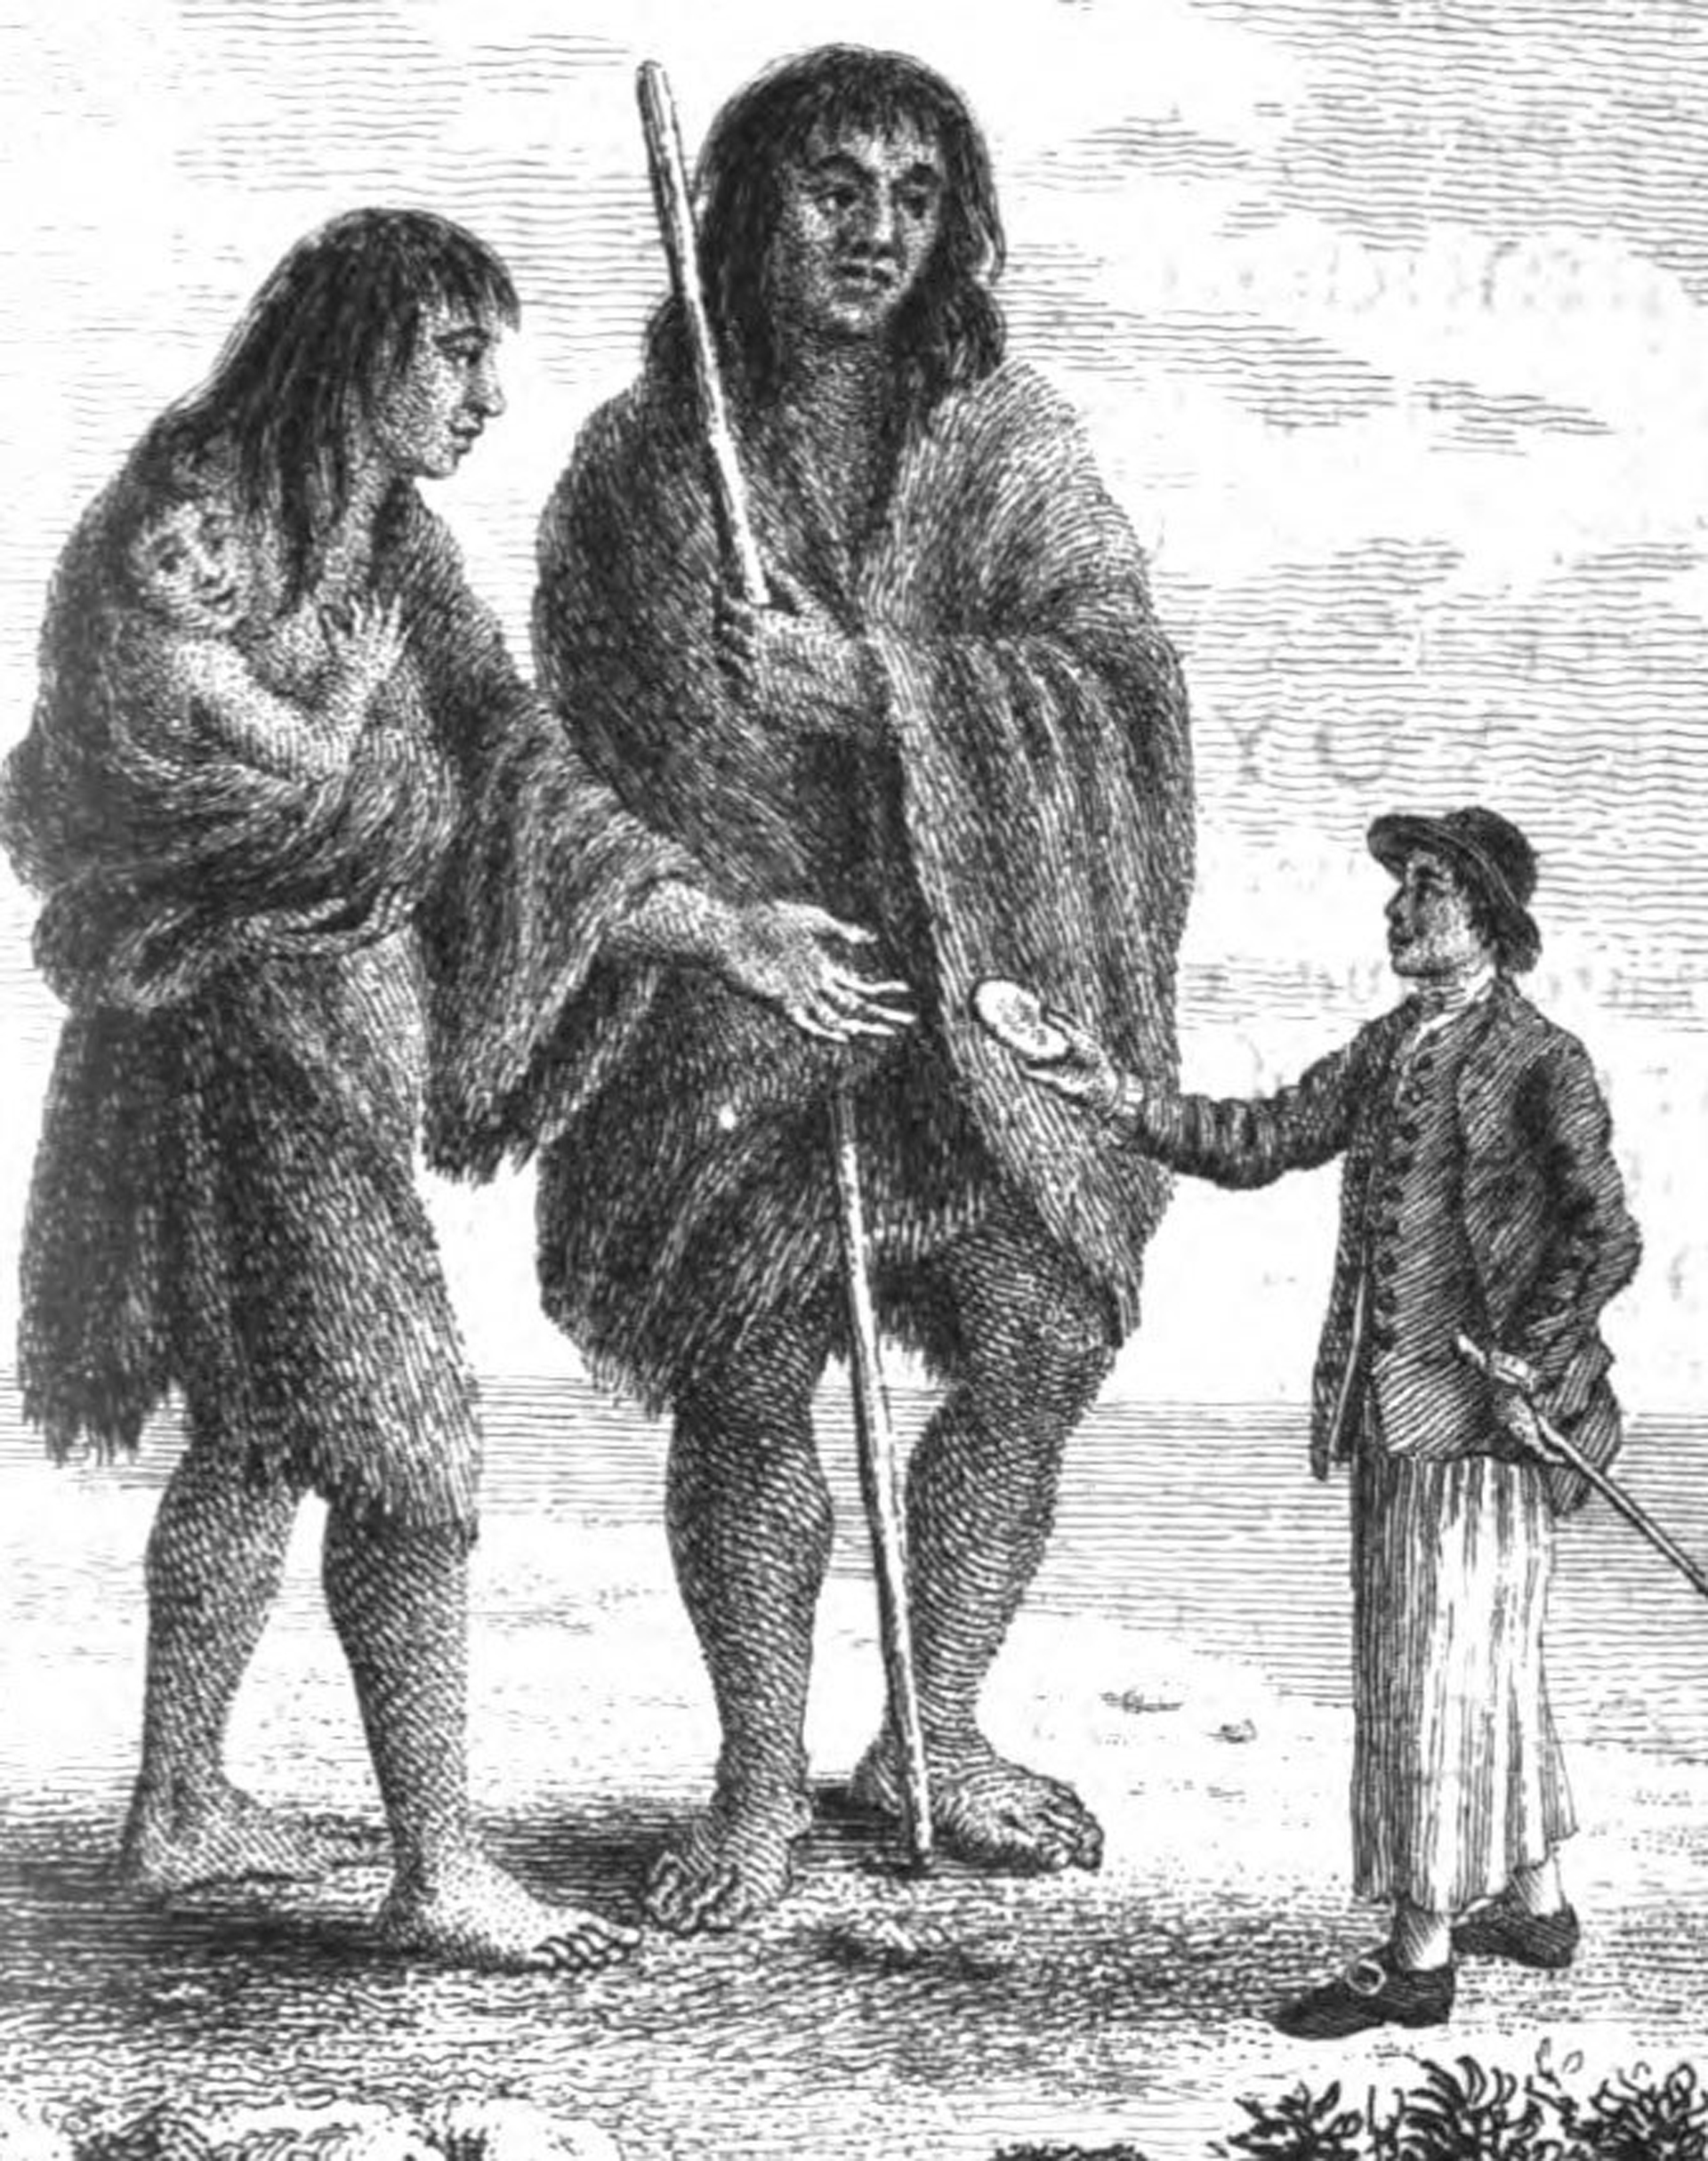 Europeans Viewed The Indigenous Peoples Found In Patagonia This Way